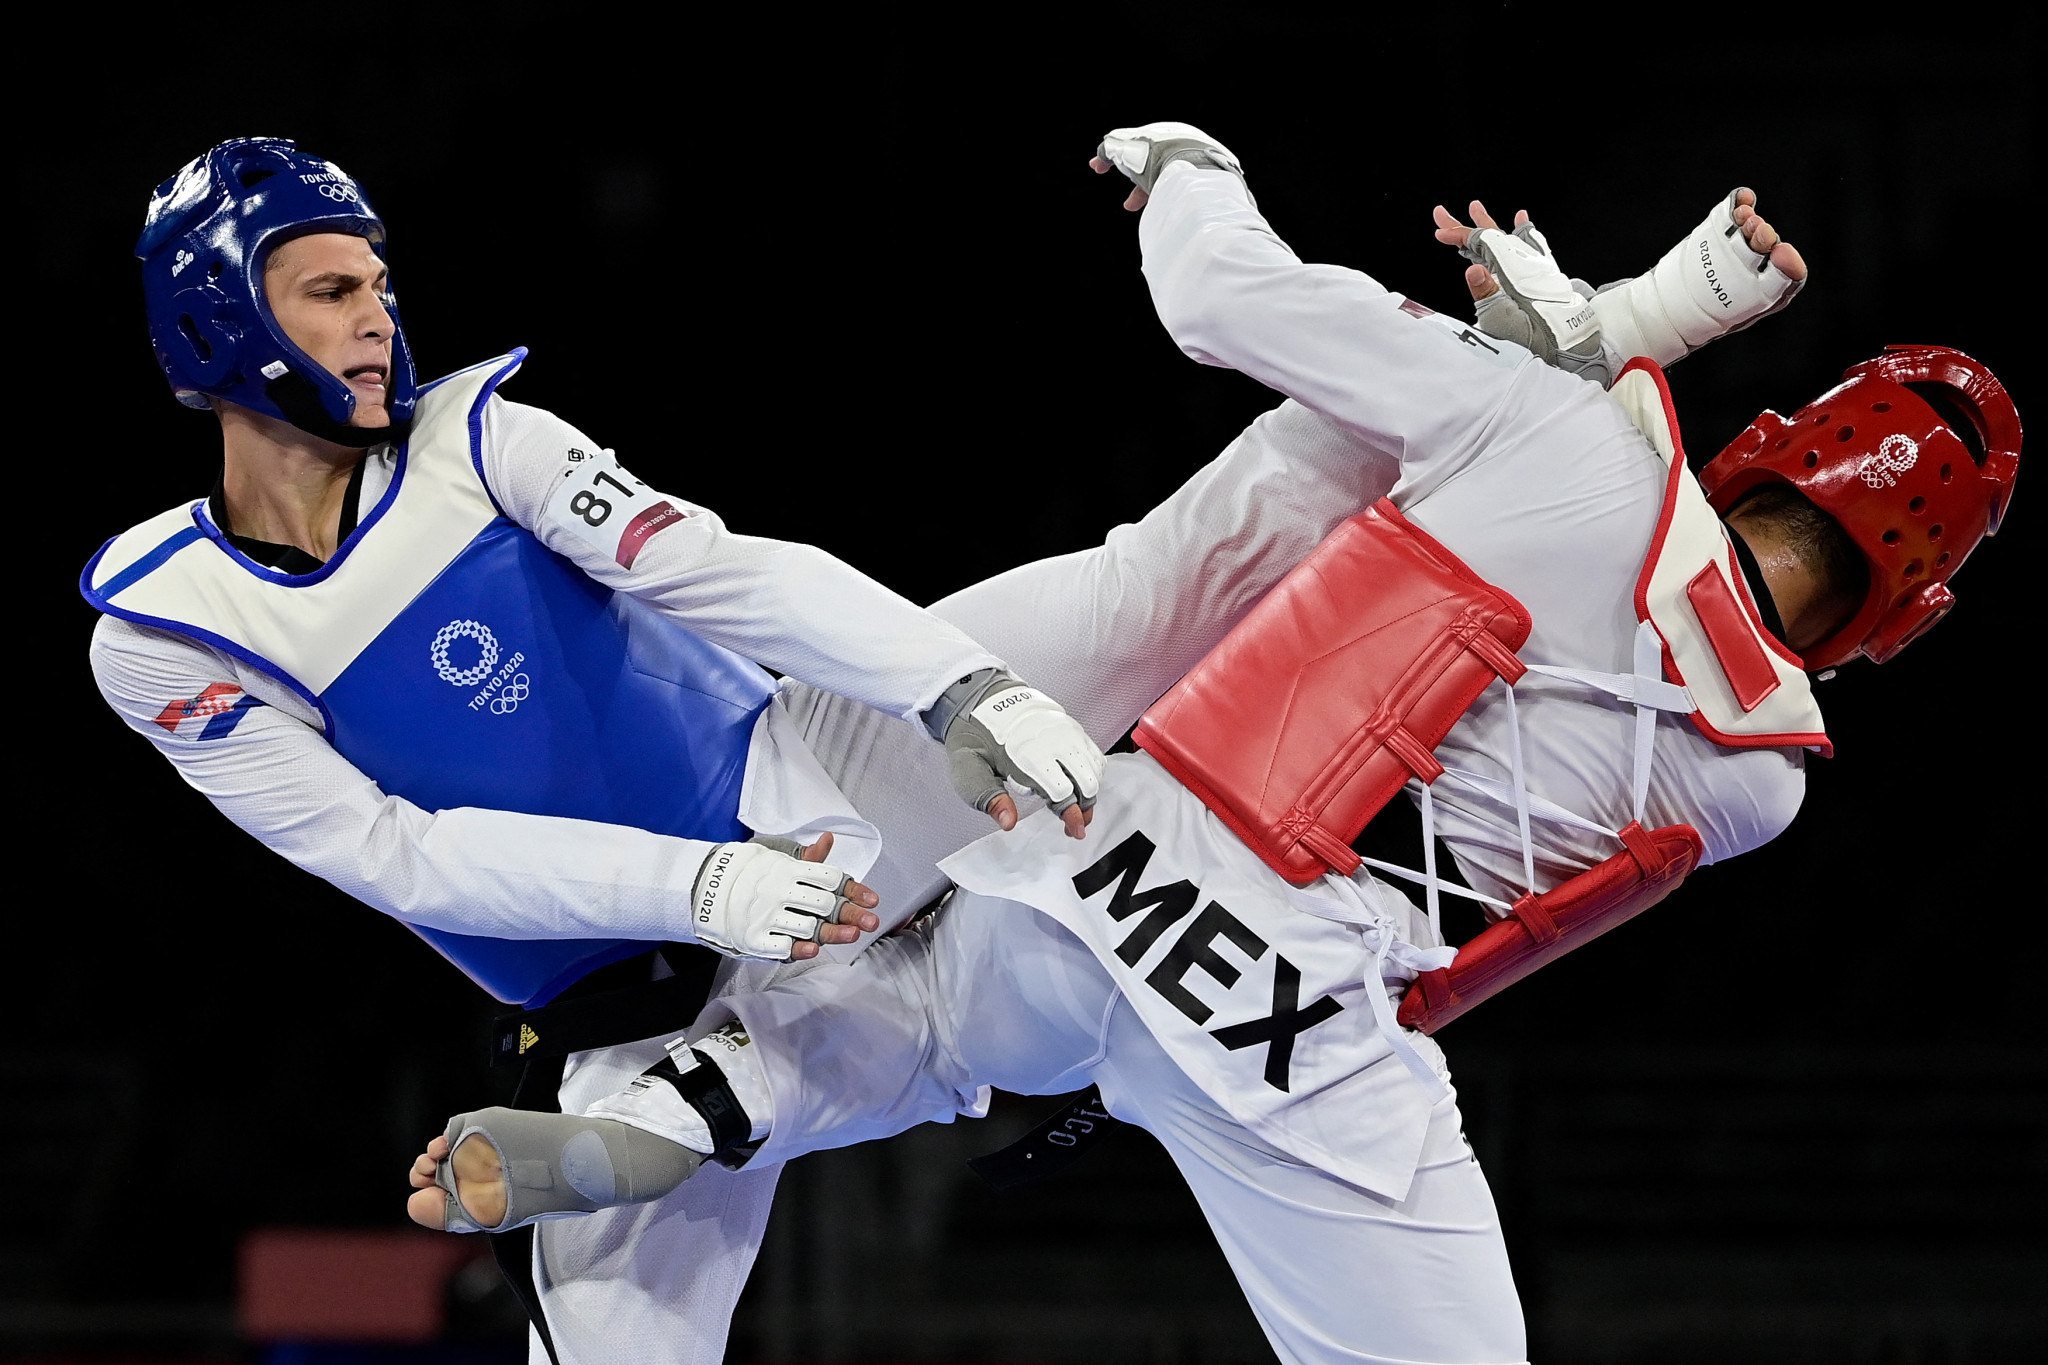 Mexico is hosting this year's World Taekwondo Championships in Cancun ©Getty Images